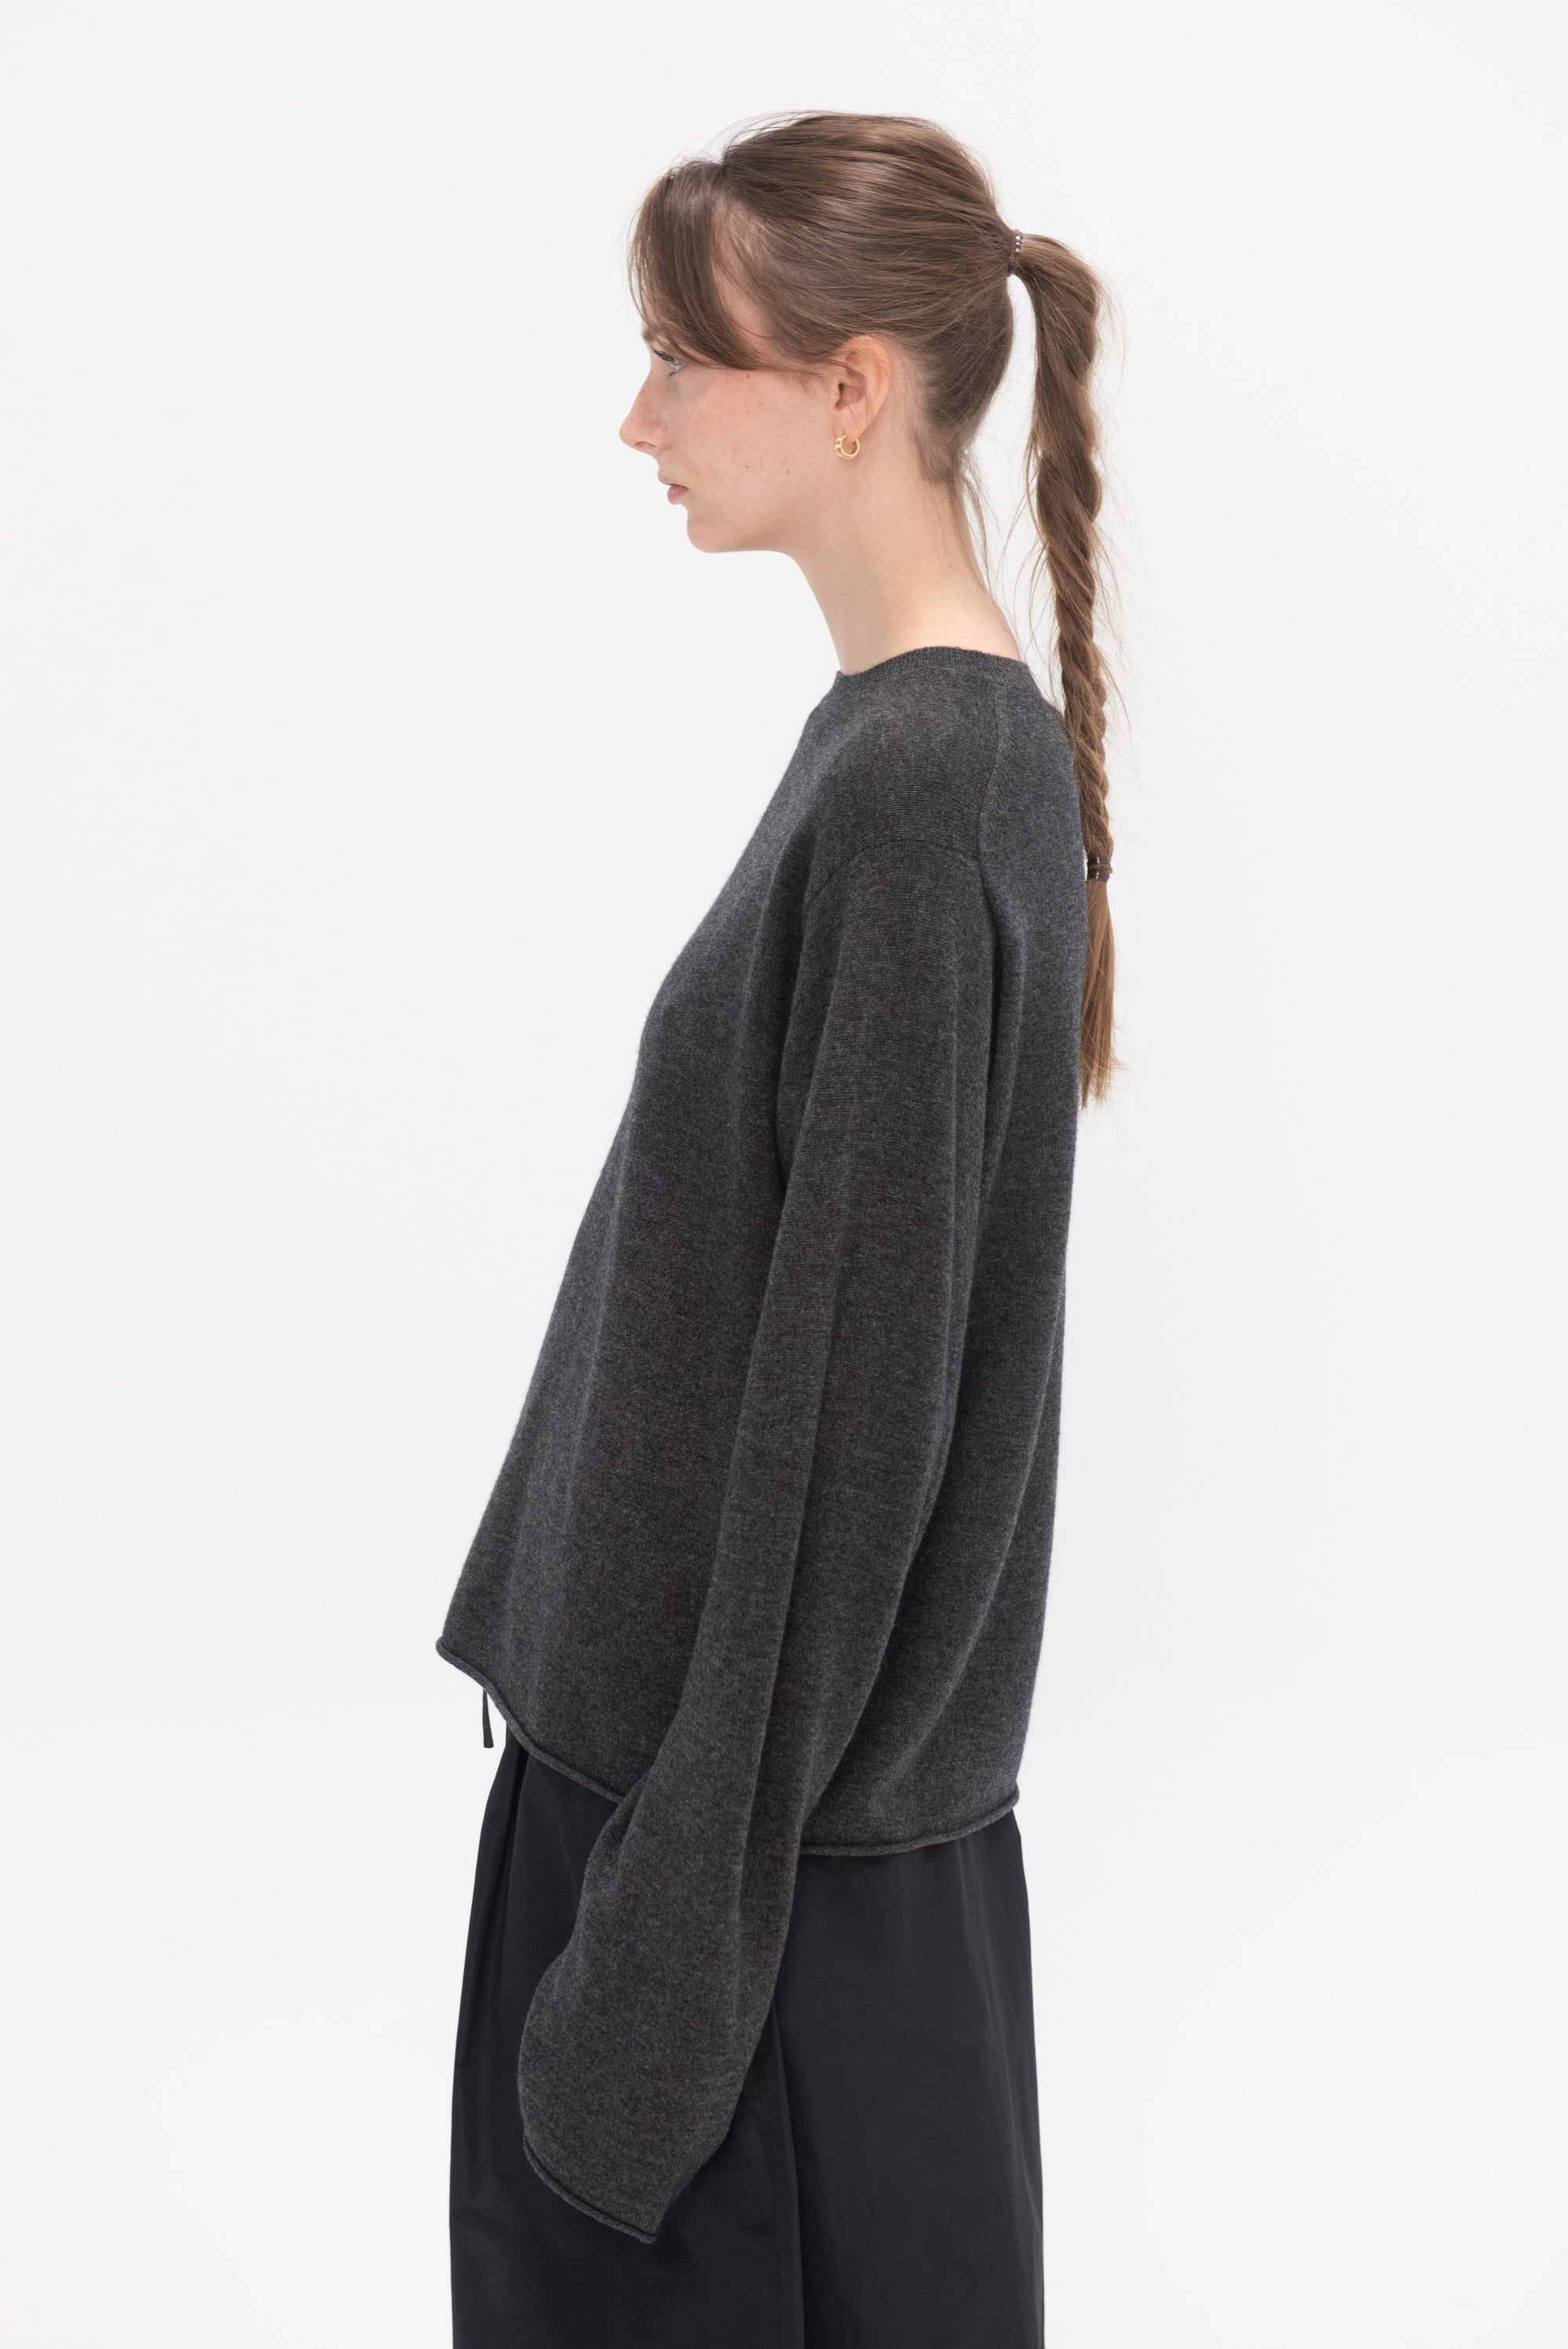 SOFIE D'HOORE - Malou Wool Cashmere Crewneck Sweater, Charcoal